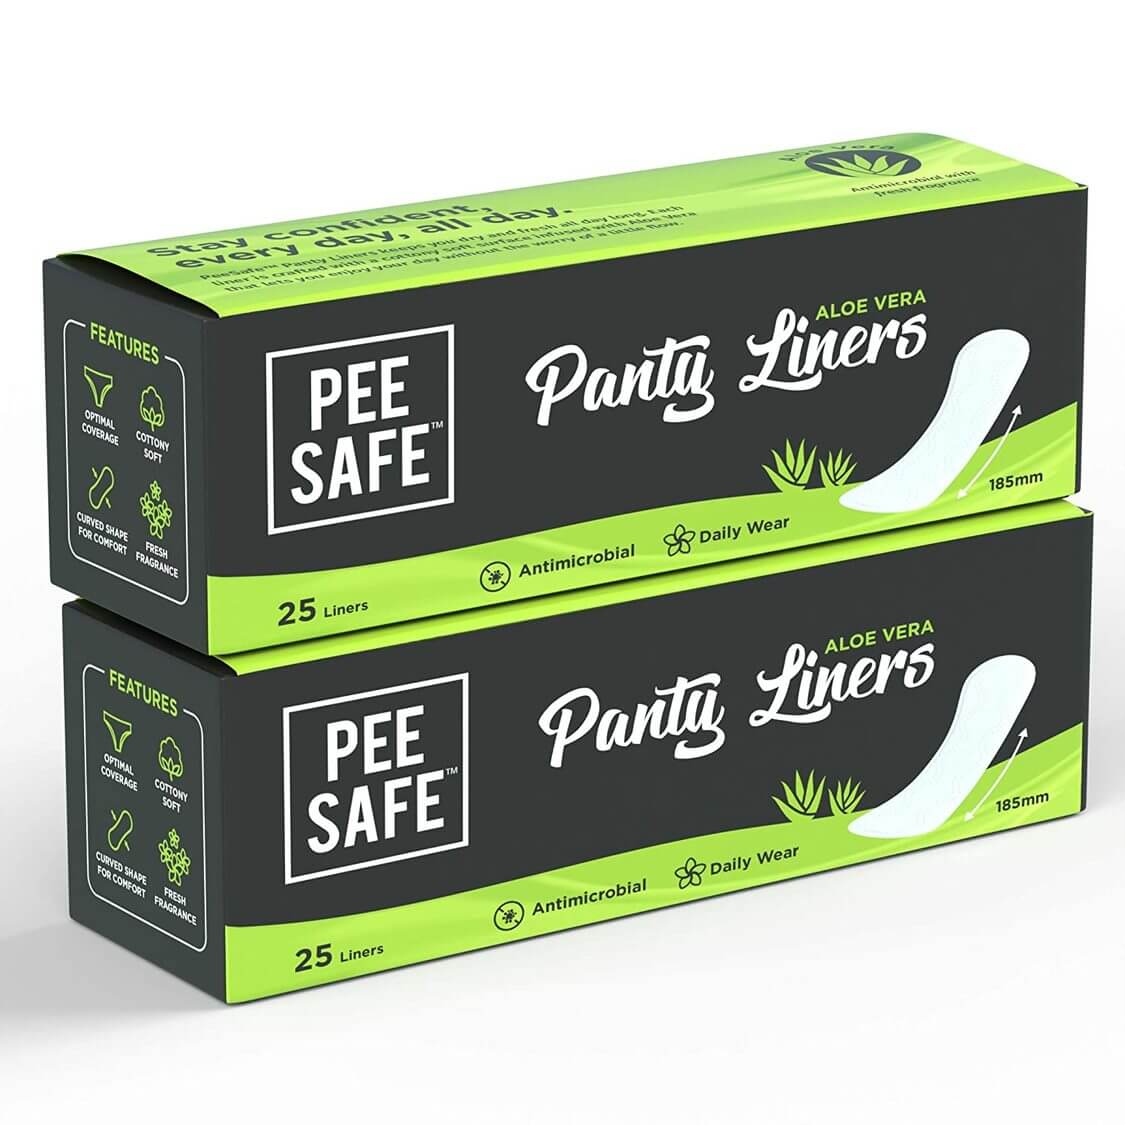 PEESAFE Aloe Vera Panty Liners for Extra Comfort